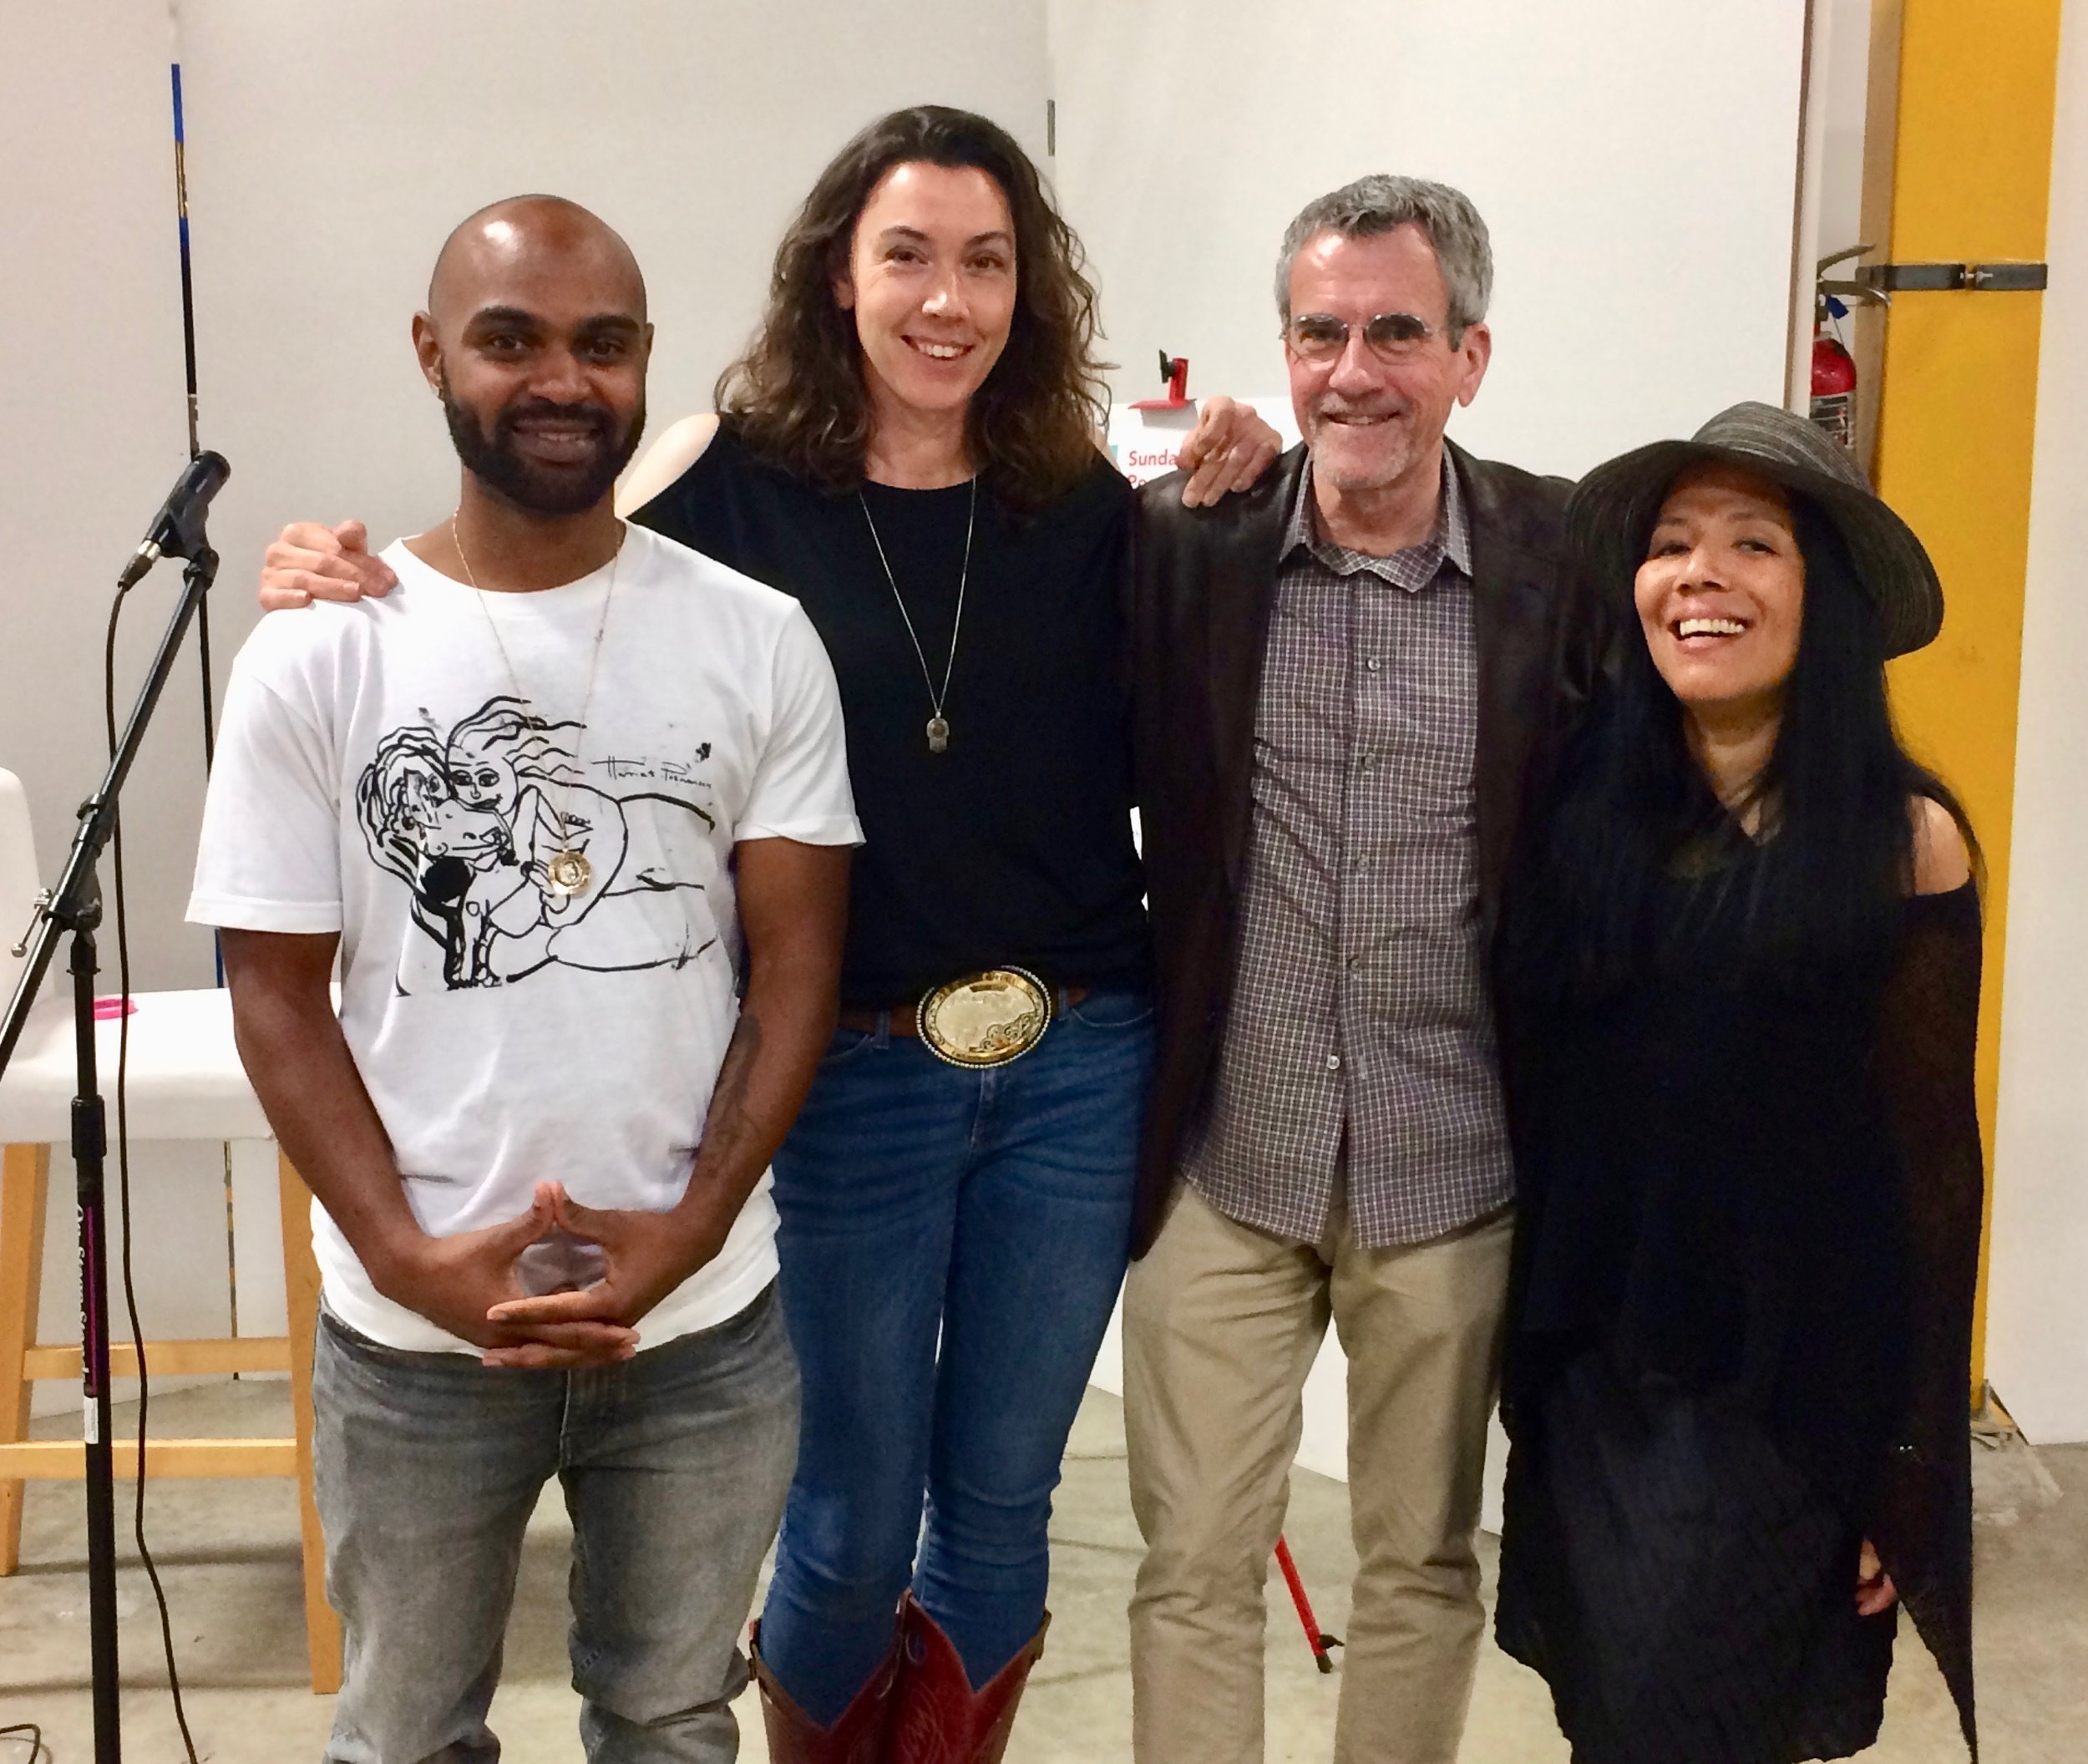 Reading with Rohan DaCosta, Sarah Kobrinsky, and Terry Lucas in Emeryville, 2018.